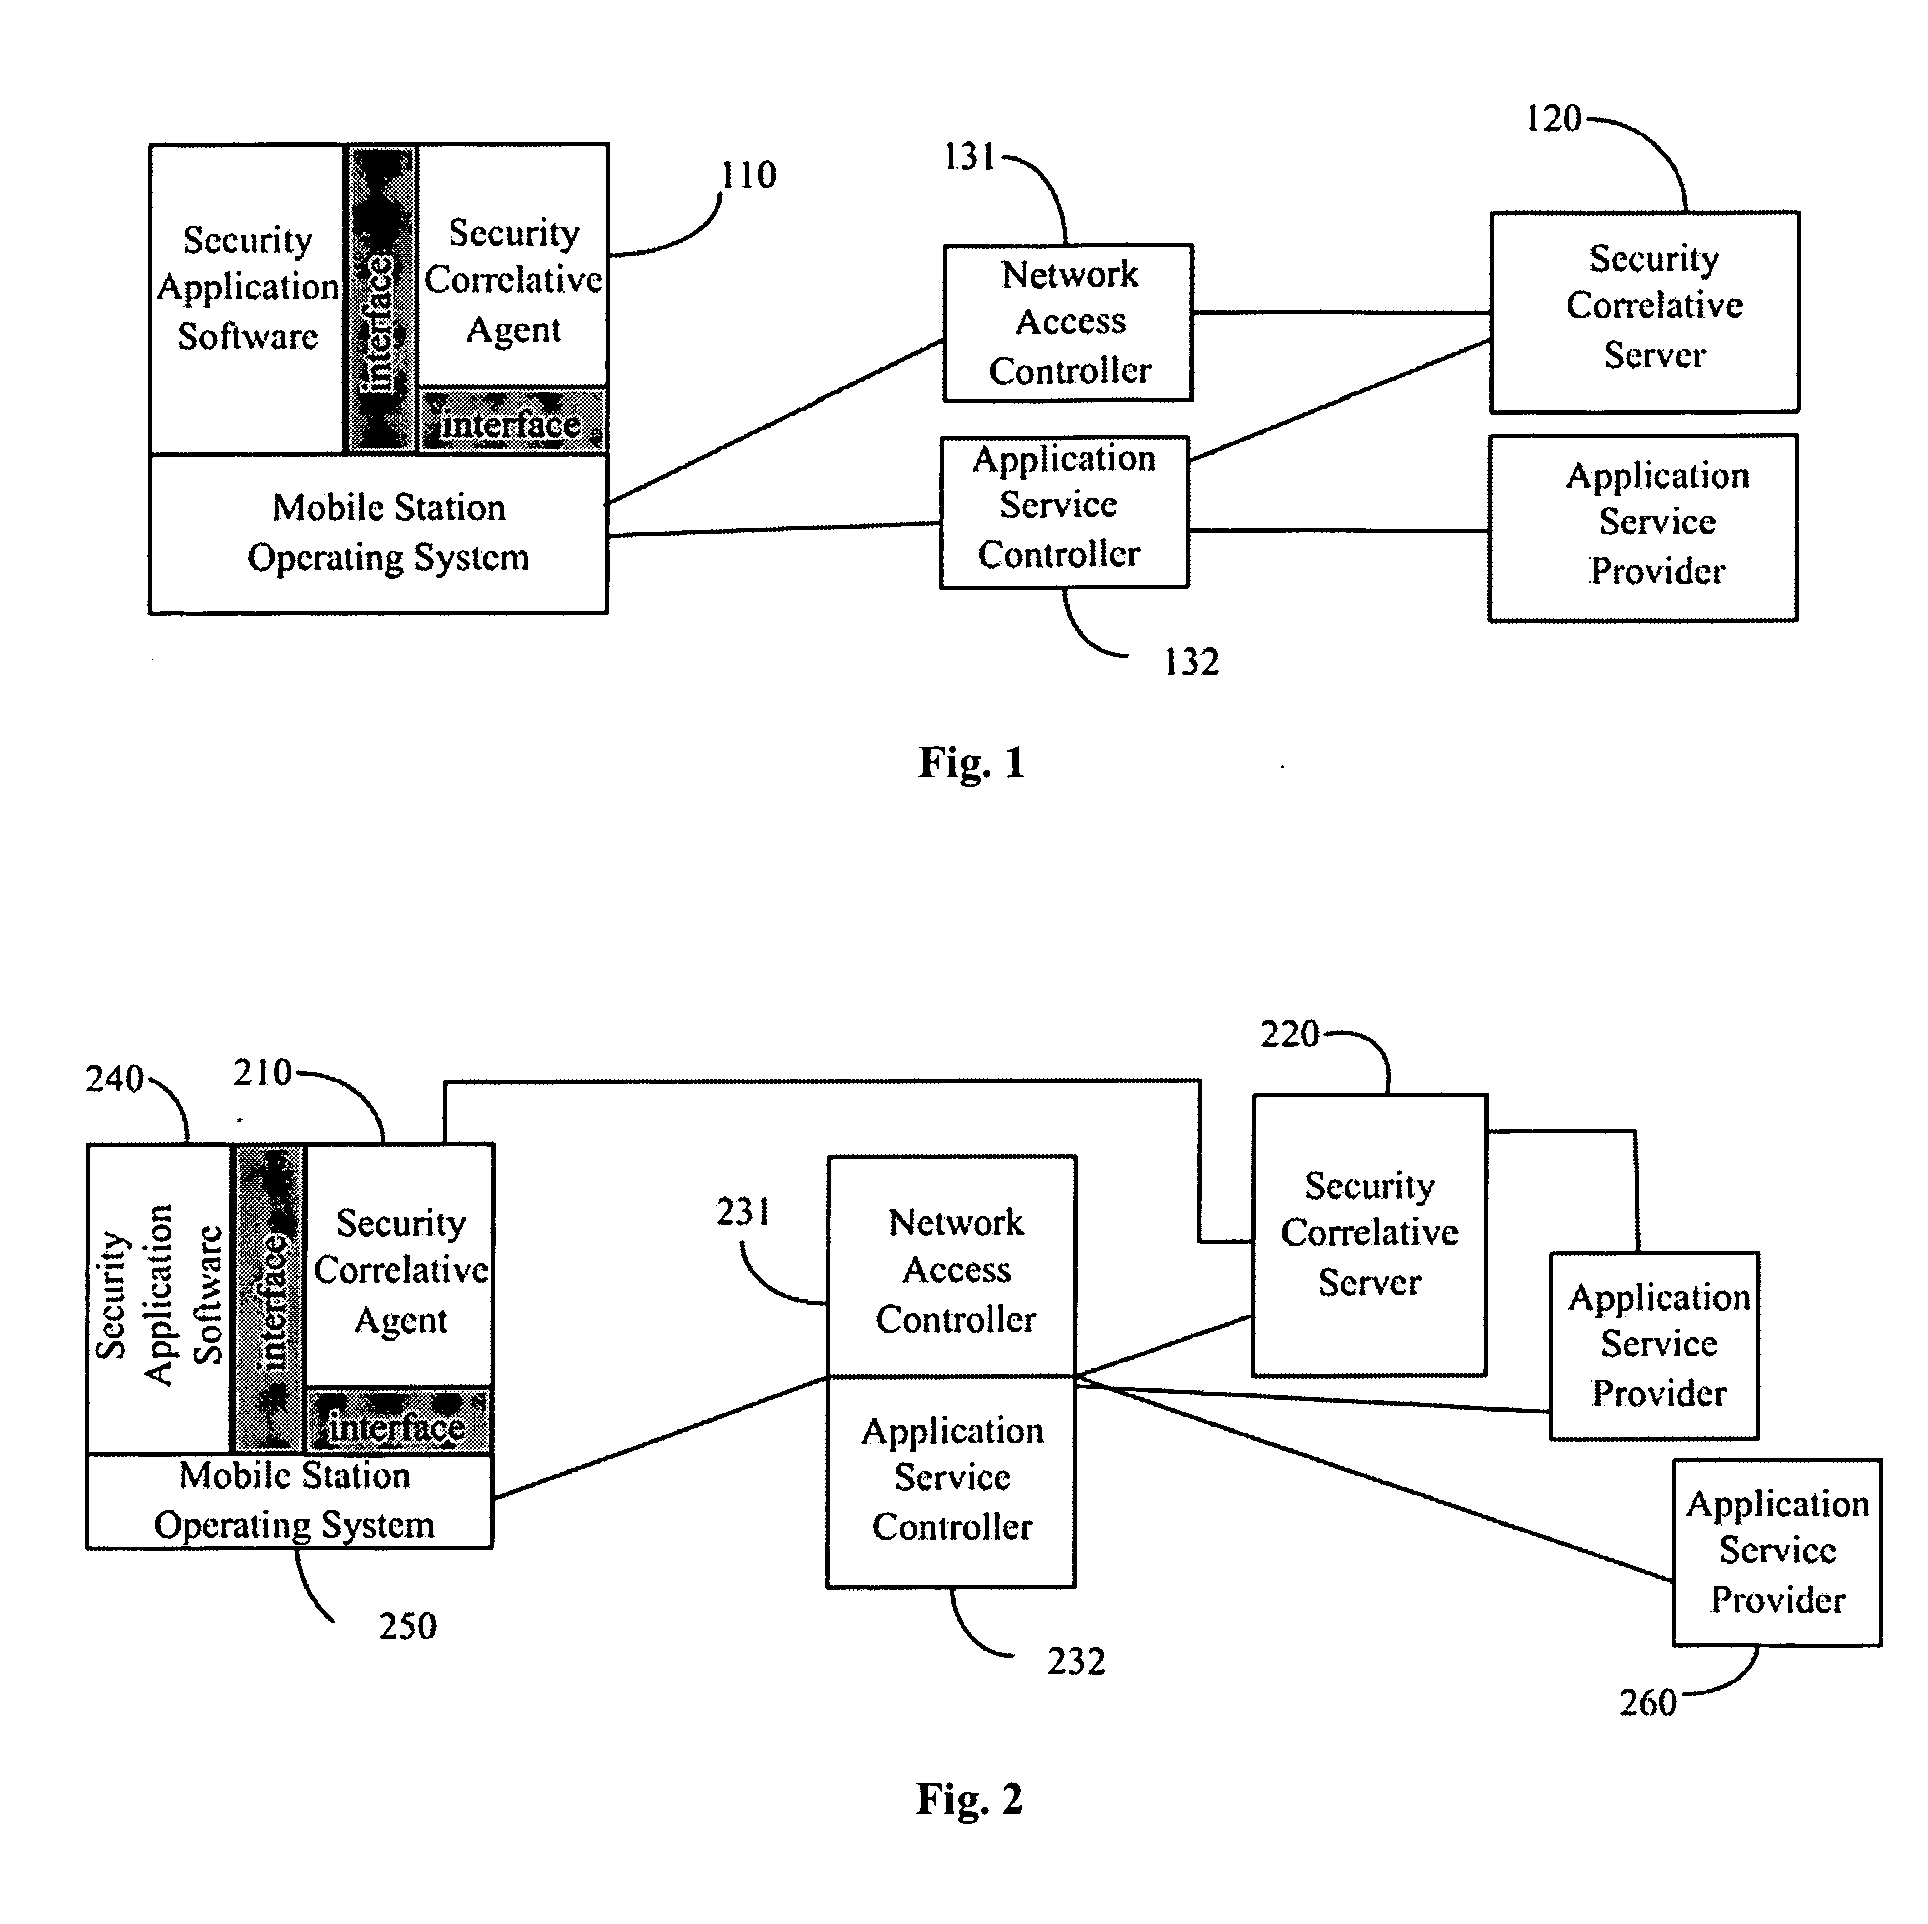 Method for implementing security update of mobile station and a correlative reacting system